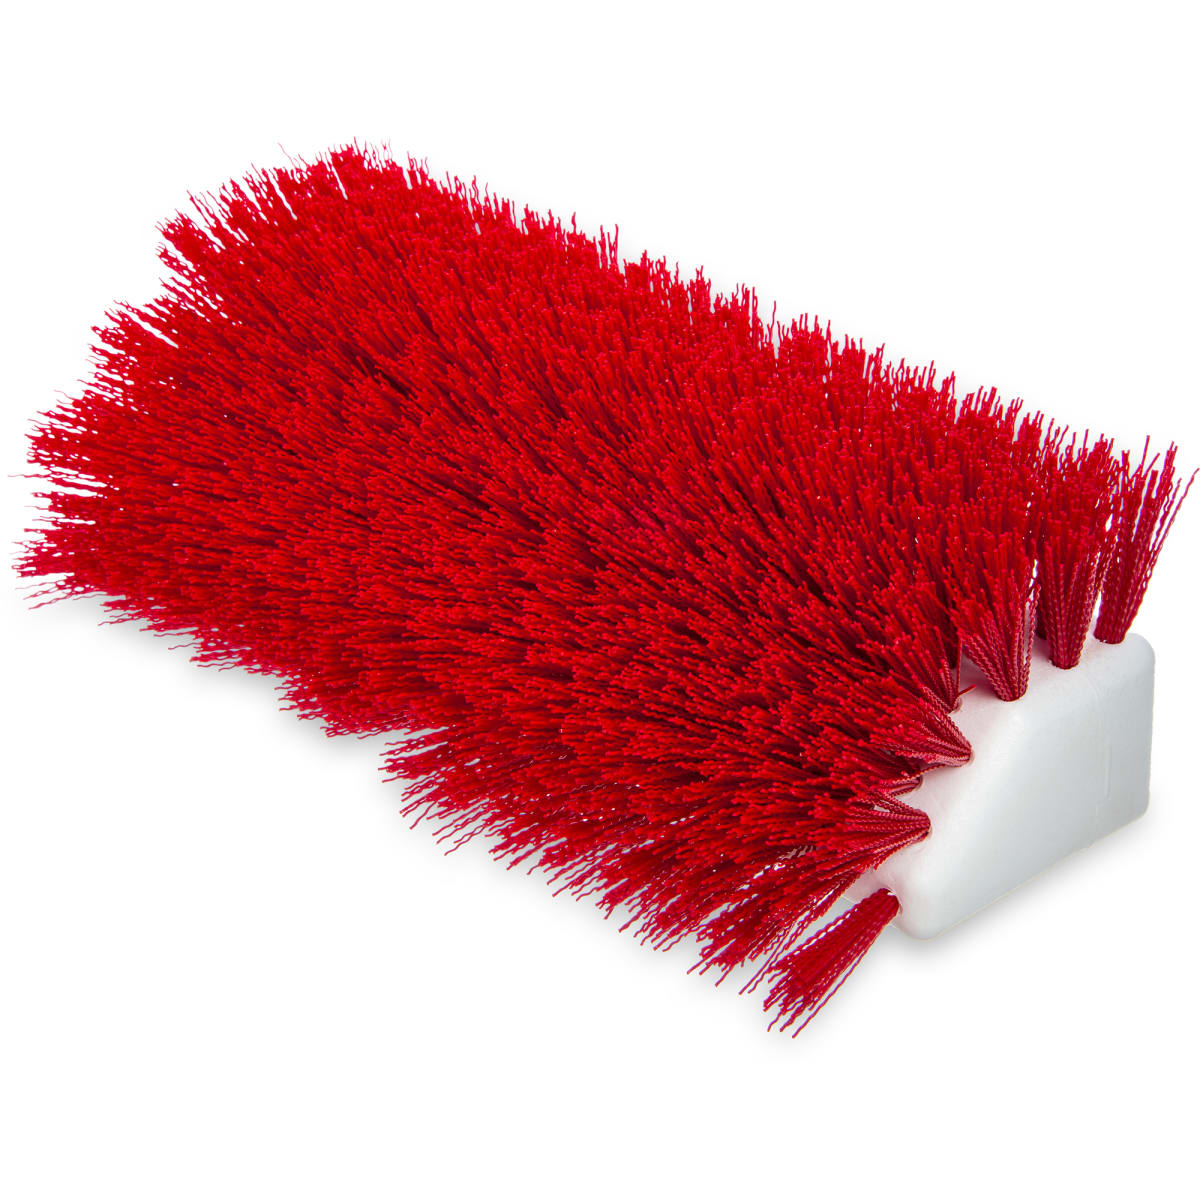 Sparta All-Purpose Utility Scrub Brushes with 8-Inch Handle